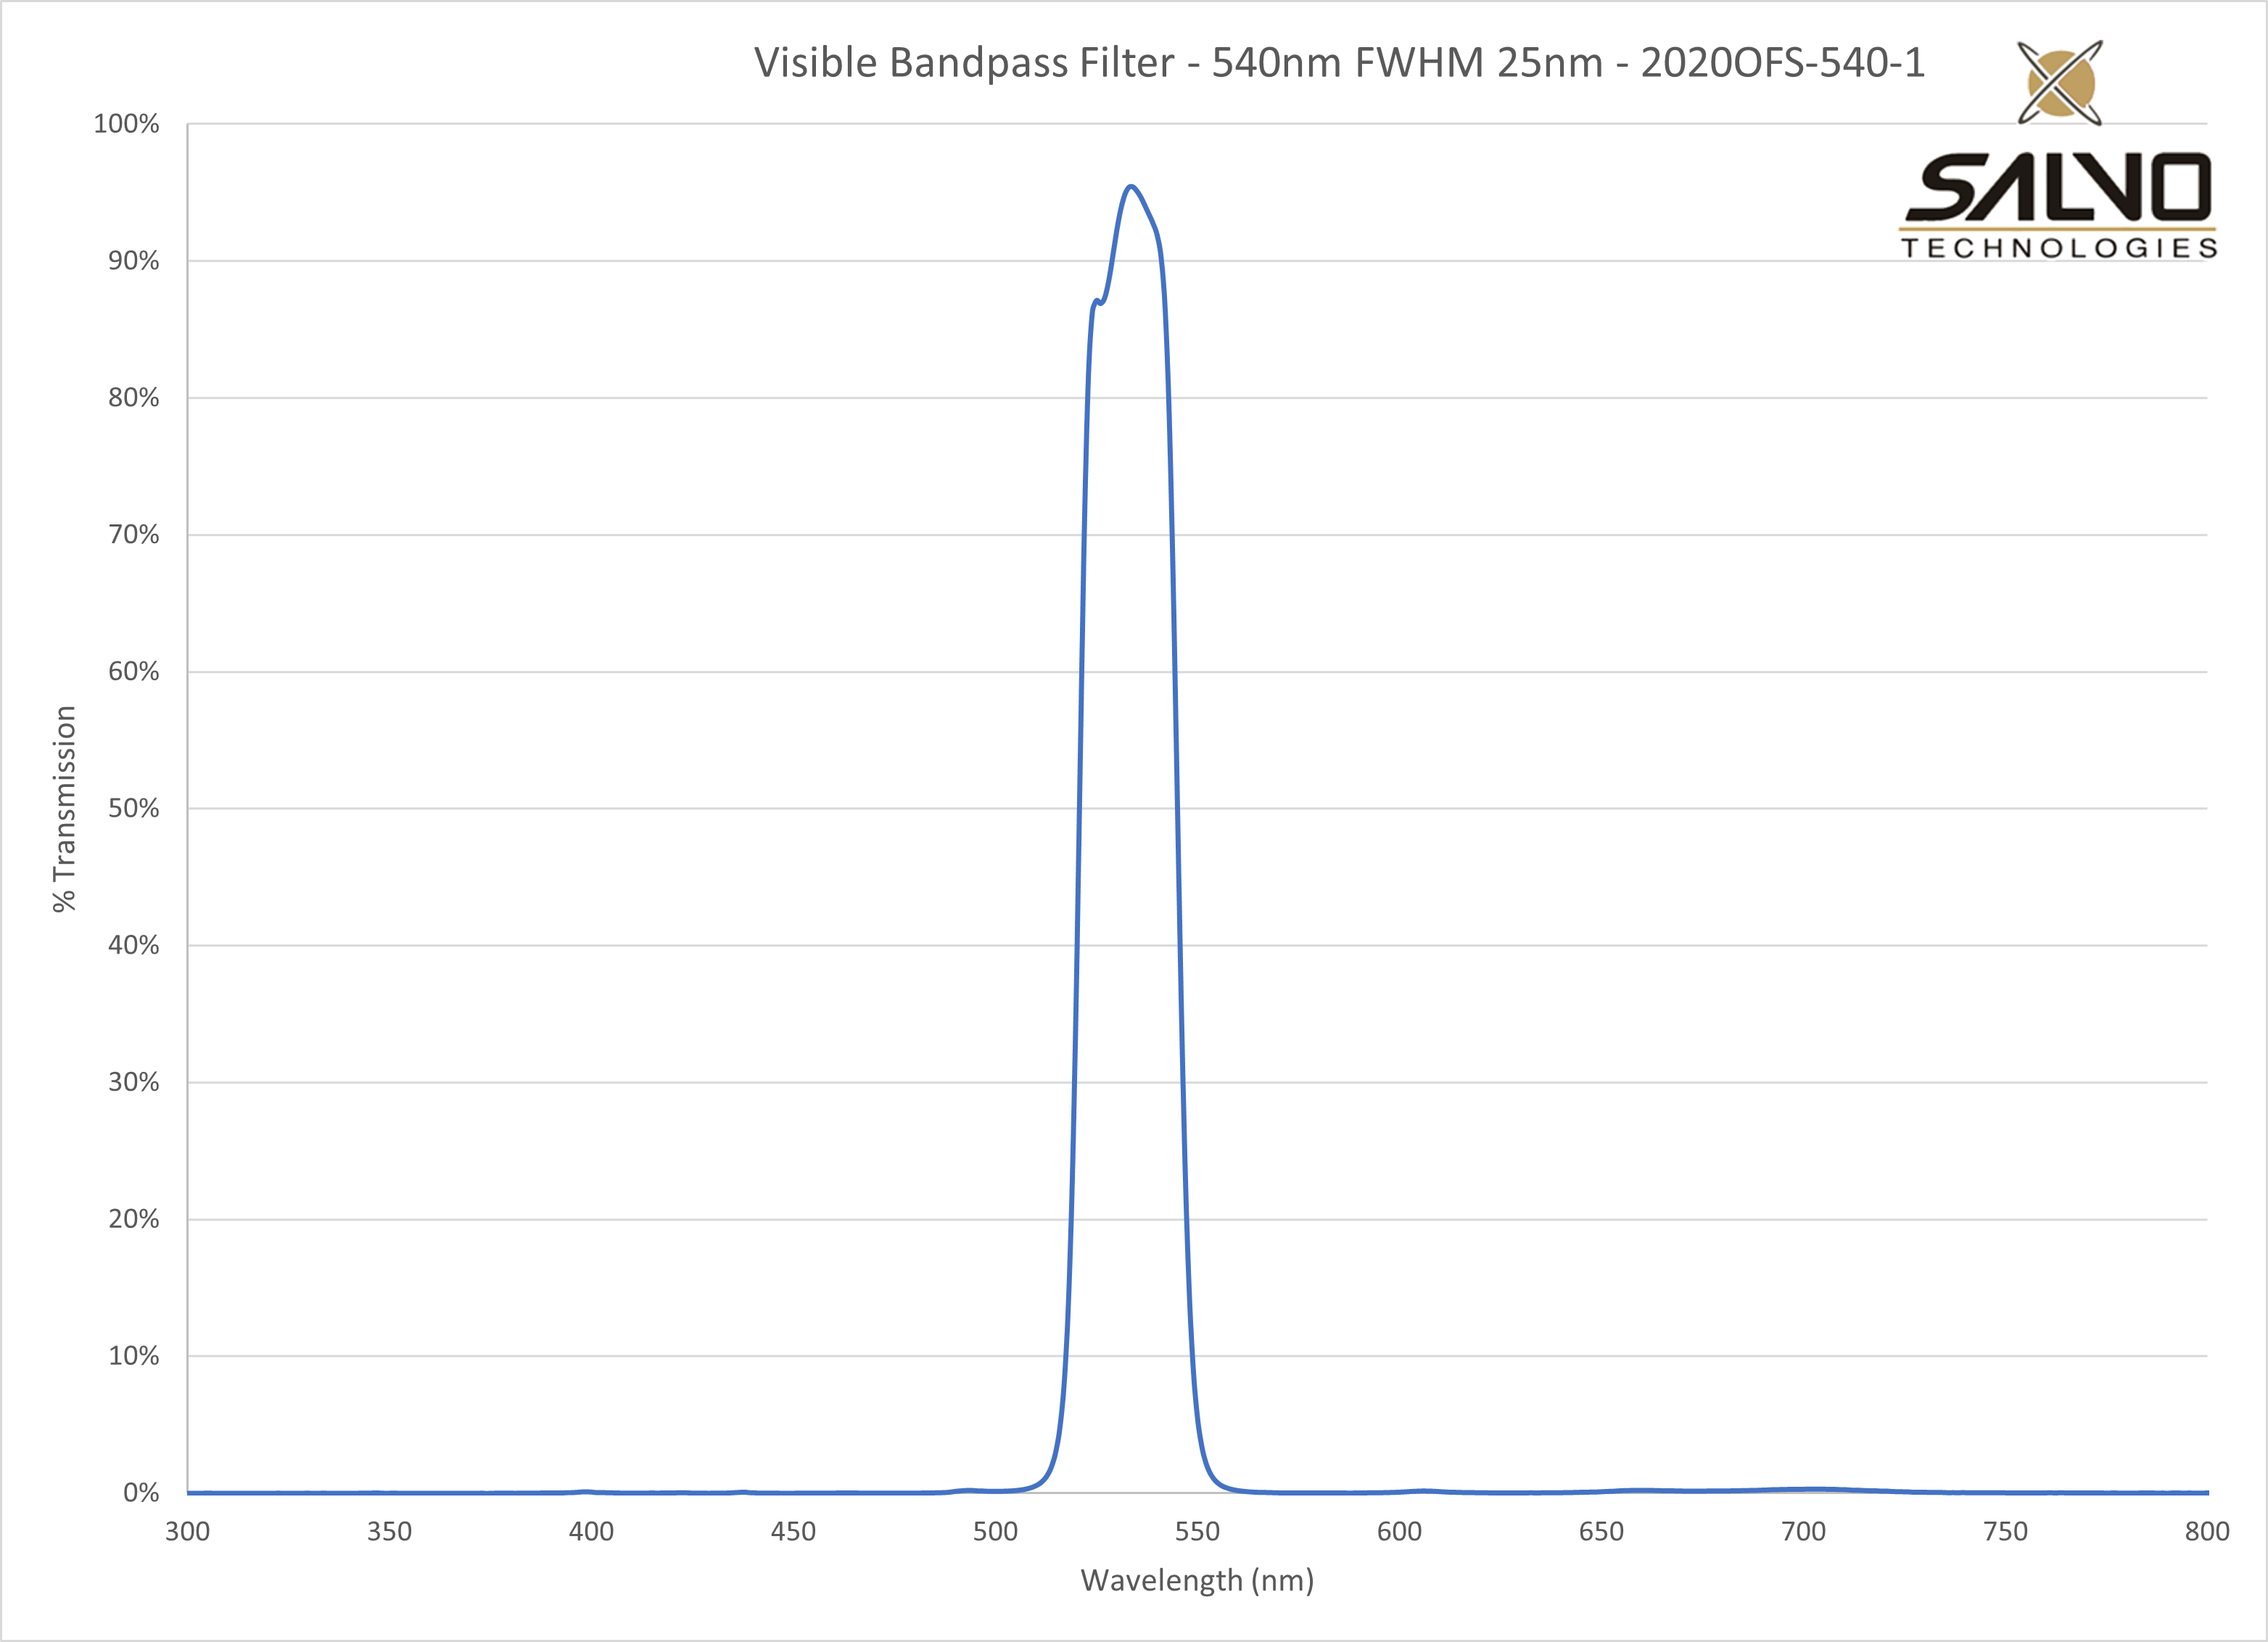 Visible Bandpass Filter - 540nm FWHM 25nm - 2020OFS-540-1